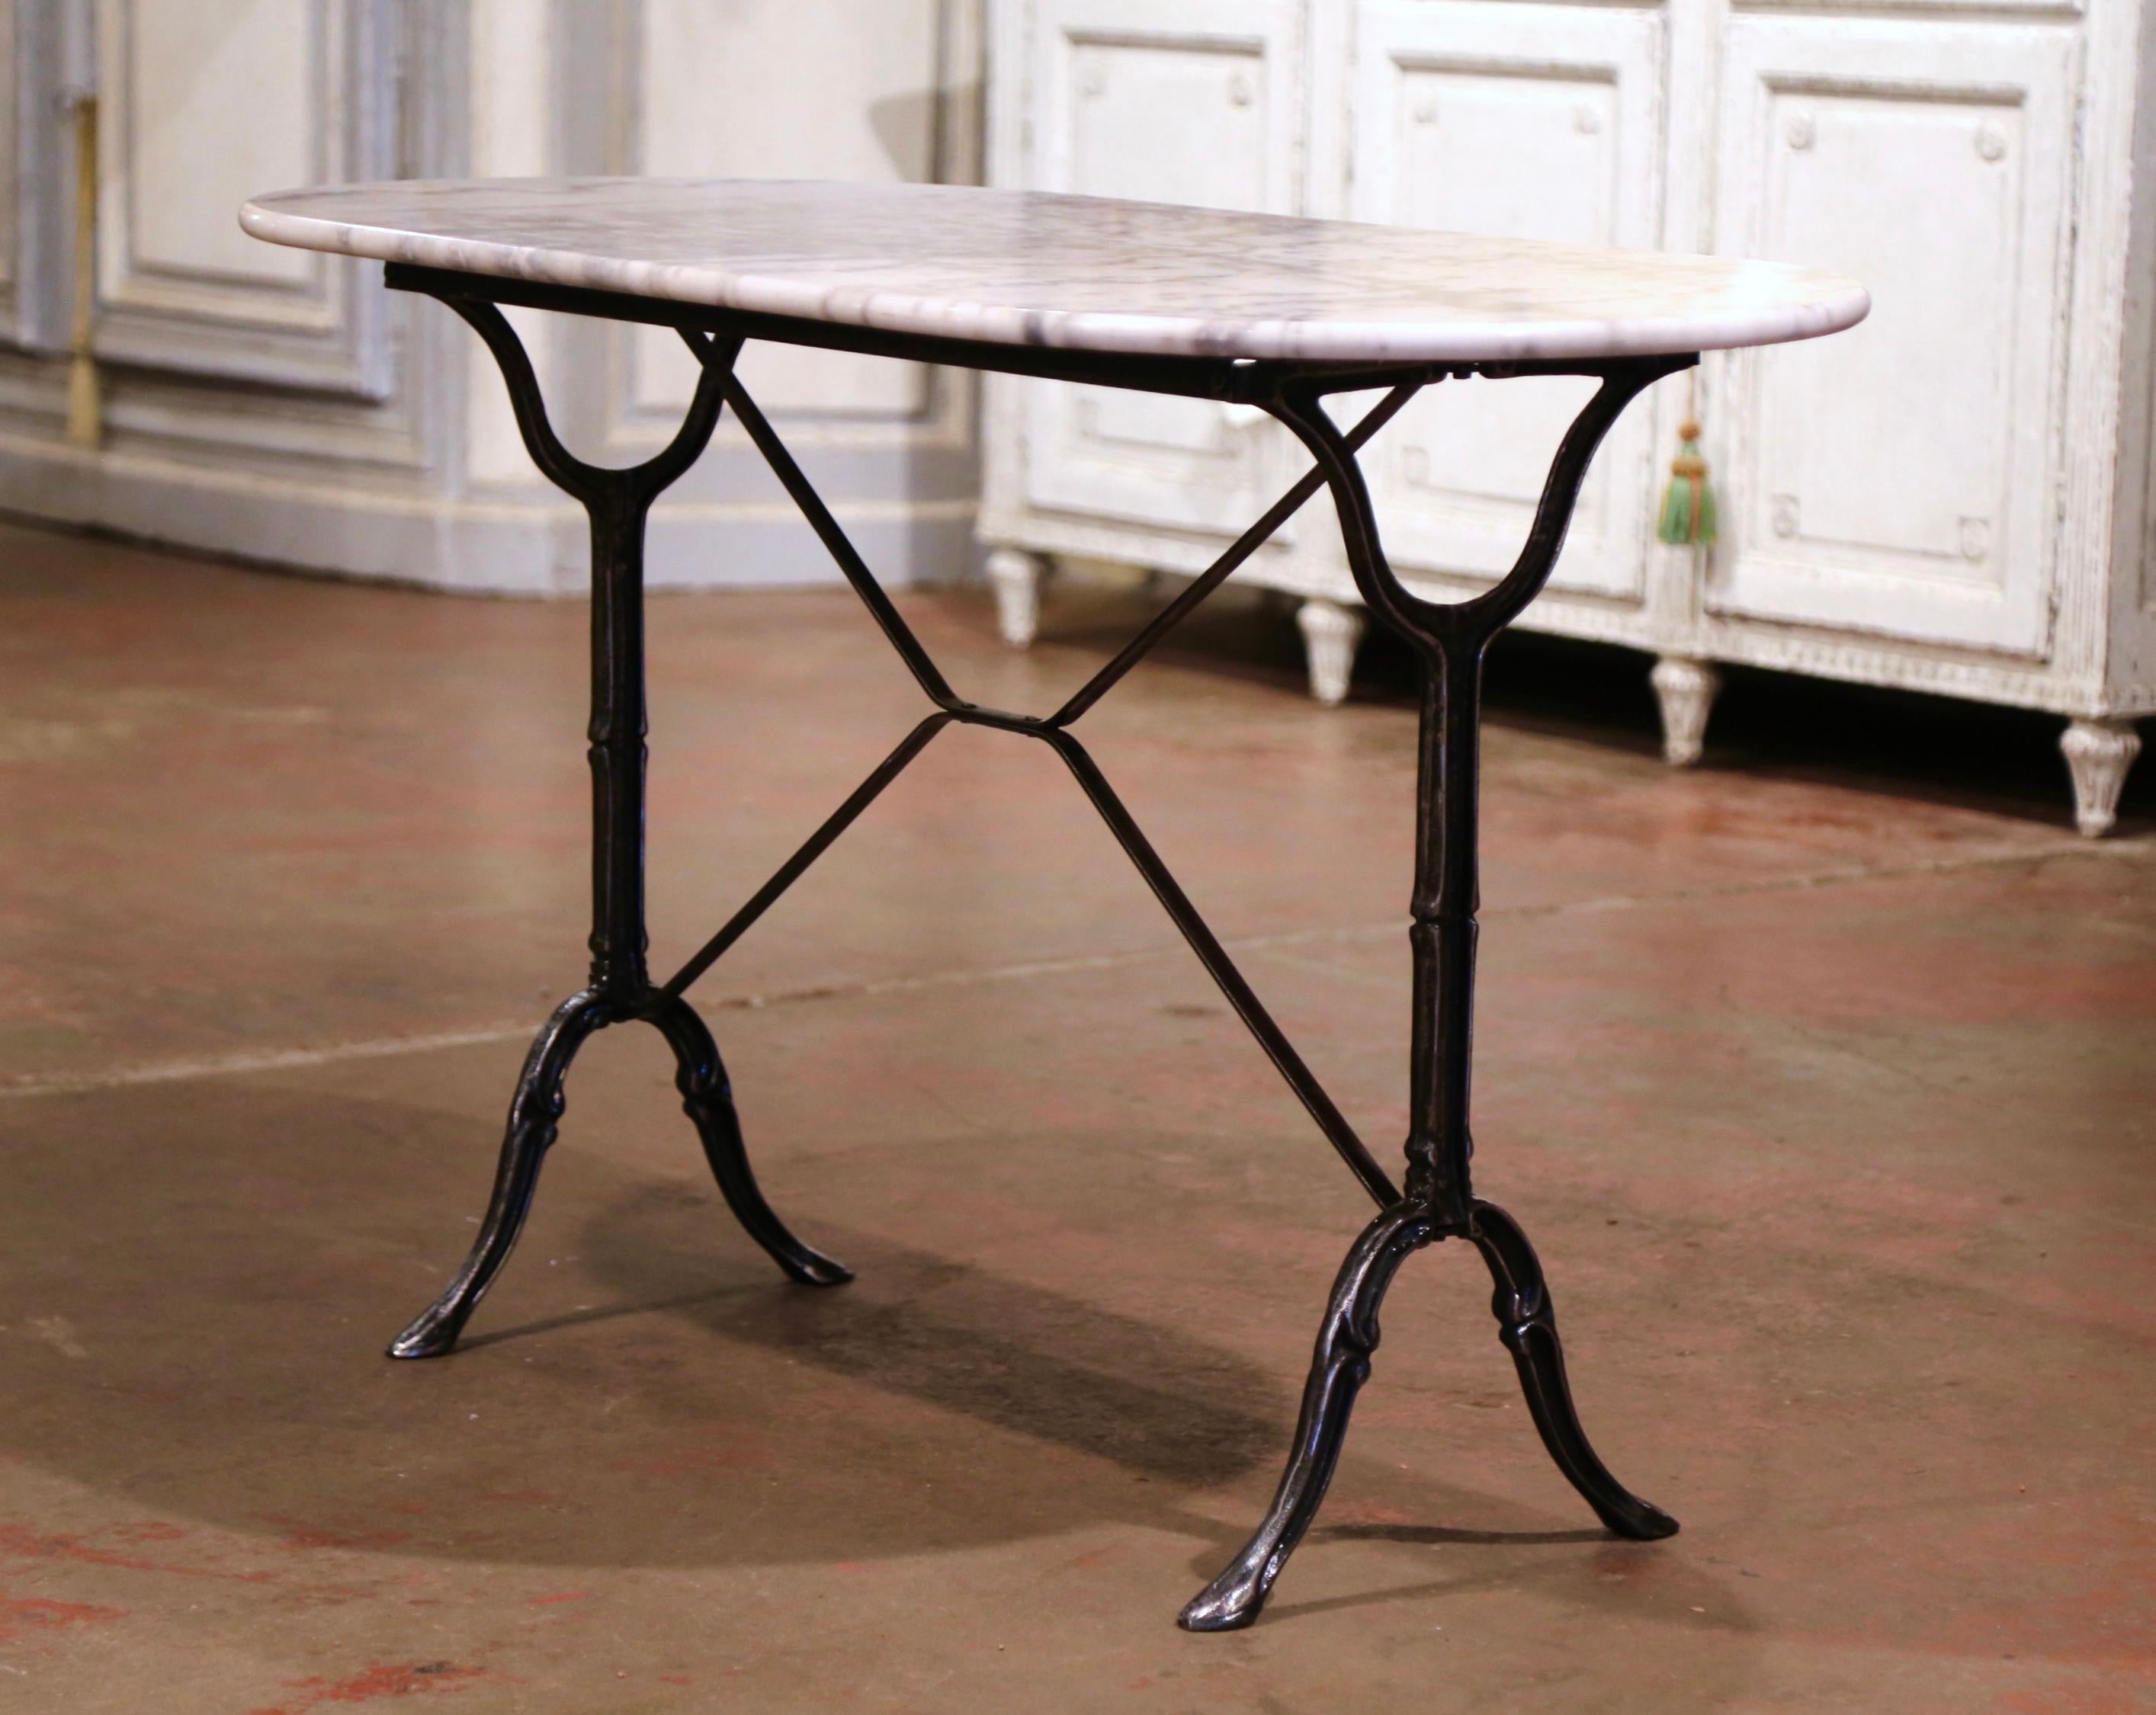 Crafted in France circa 1920, the antique cast iron table sits on a trestle base with elegant scroll legs, joined with a double decorative stretcher. The piece is dressed with the original oval white and grey veins marble top. The classic French